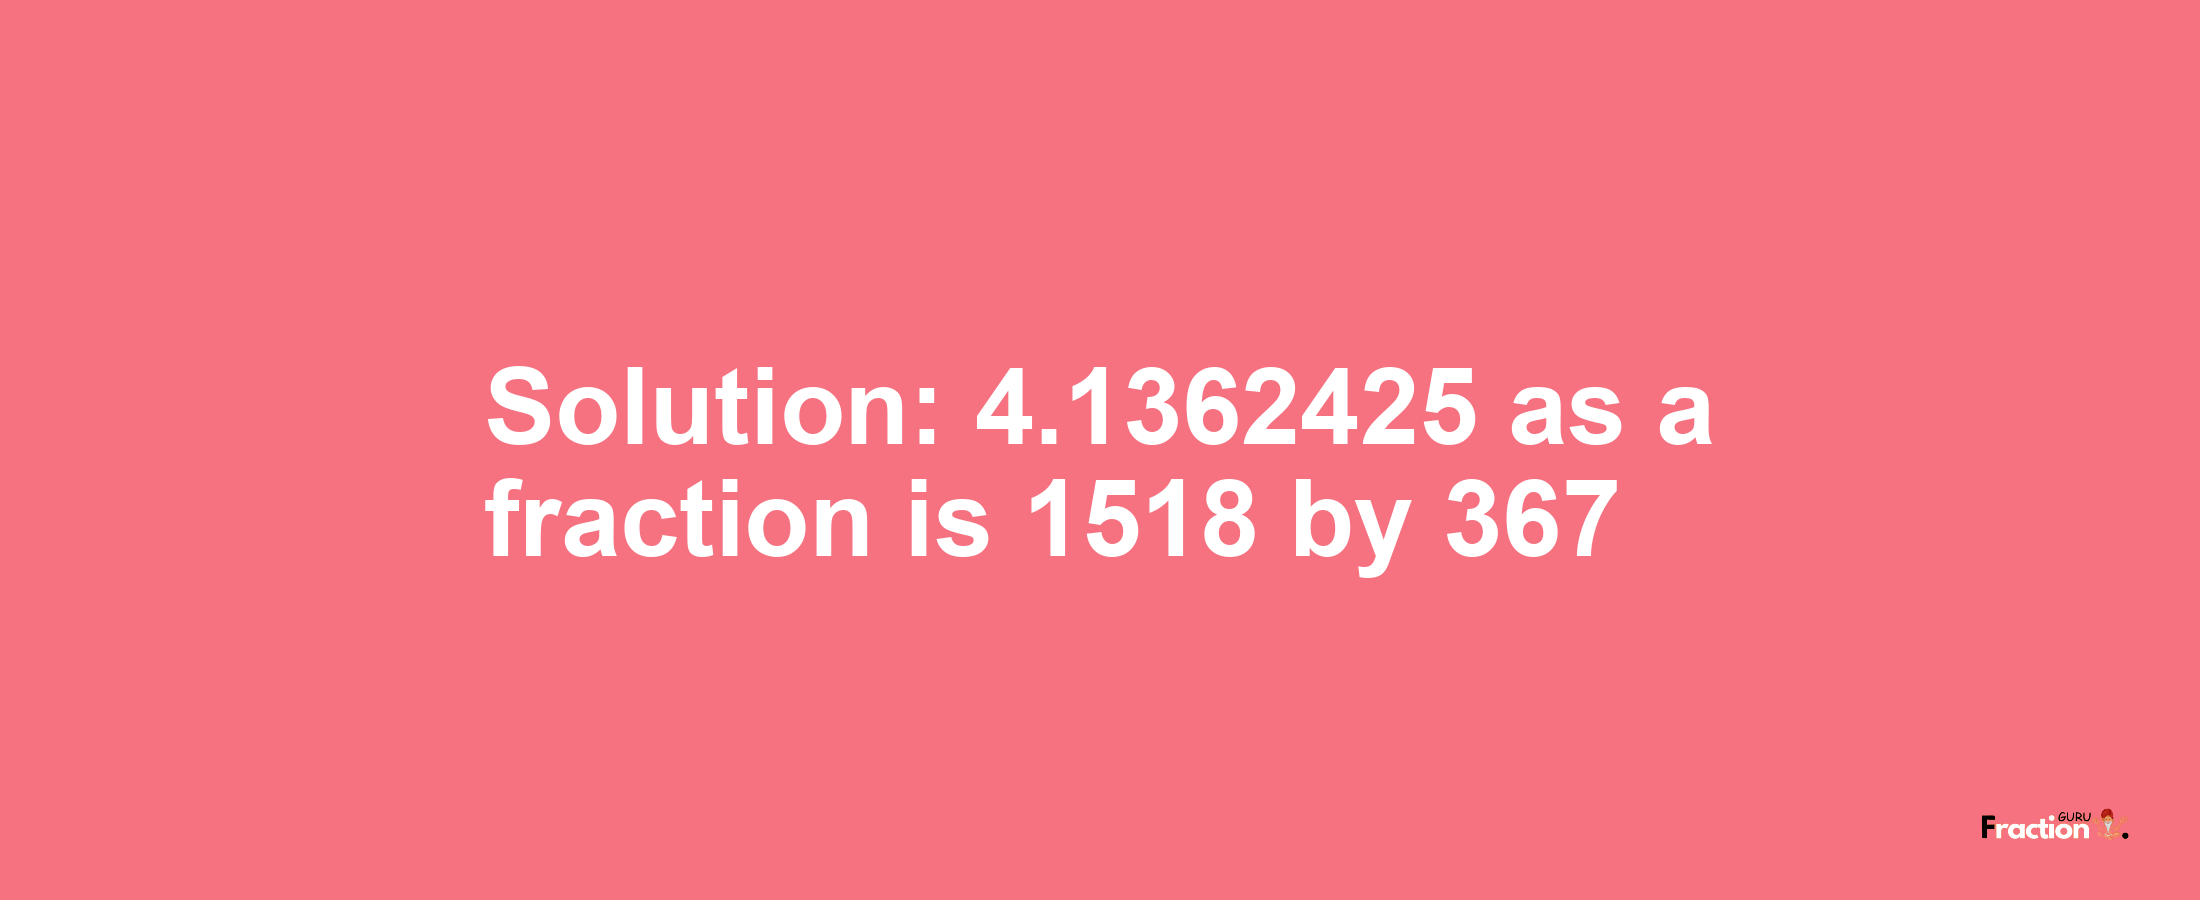 Solution:4.1362425 as a fraction is 1518/367